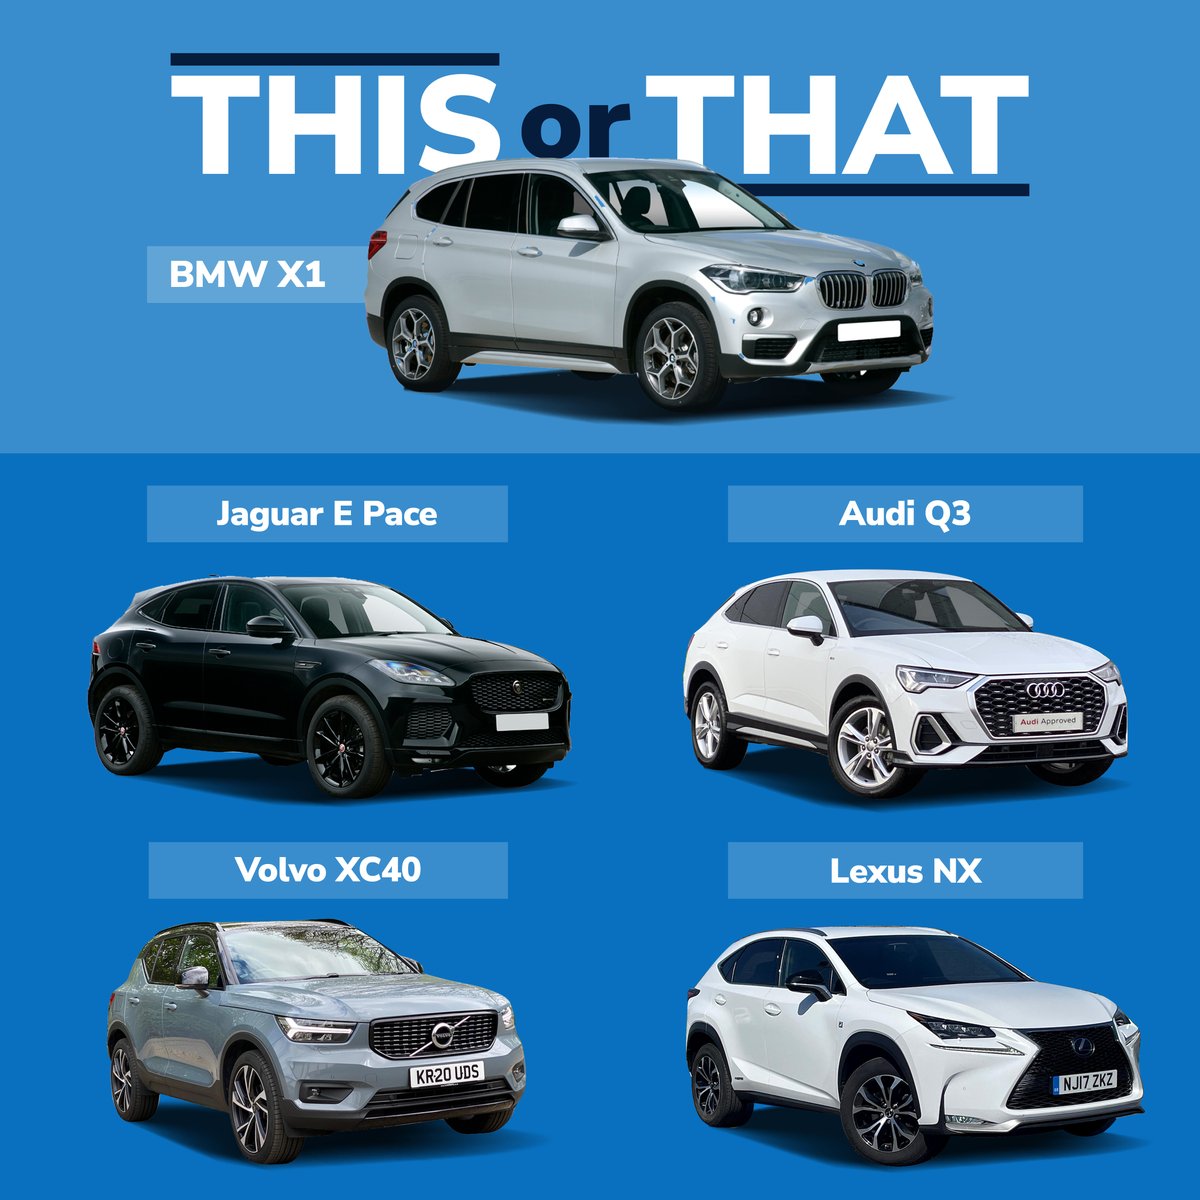 🚗🌟 It's time to pick your favorite! Which one of our vehicles steals the spotlight? Let us know in the comments which car stands out for you. Our lineup is filled with head-turners that are sure to impress. Show some love to your top choice! #ChooseLookers #ThisOrThat